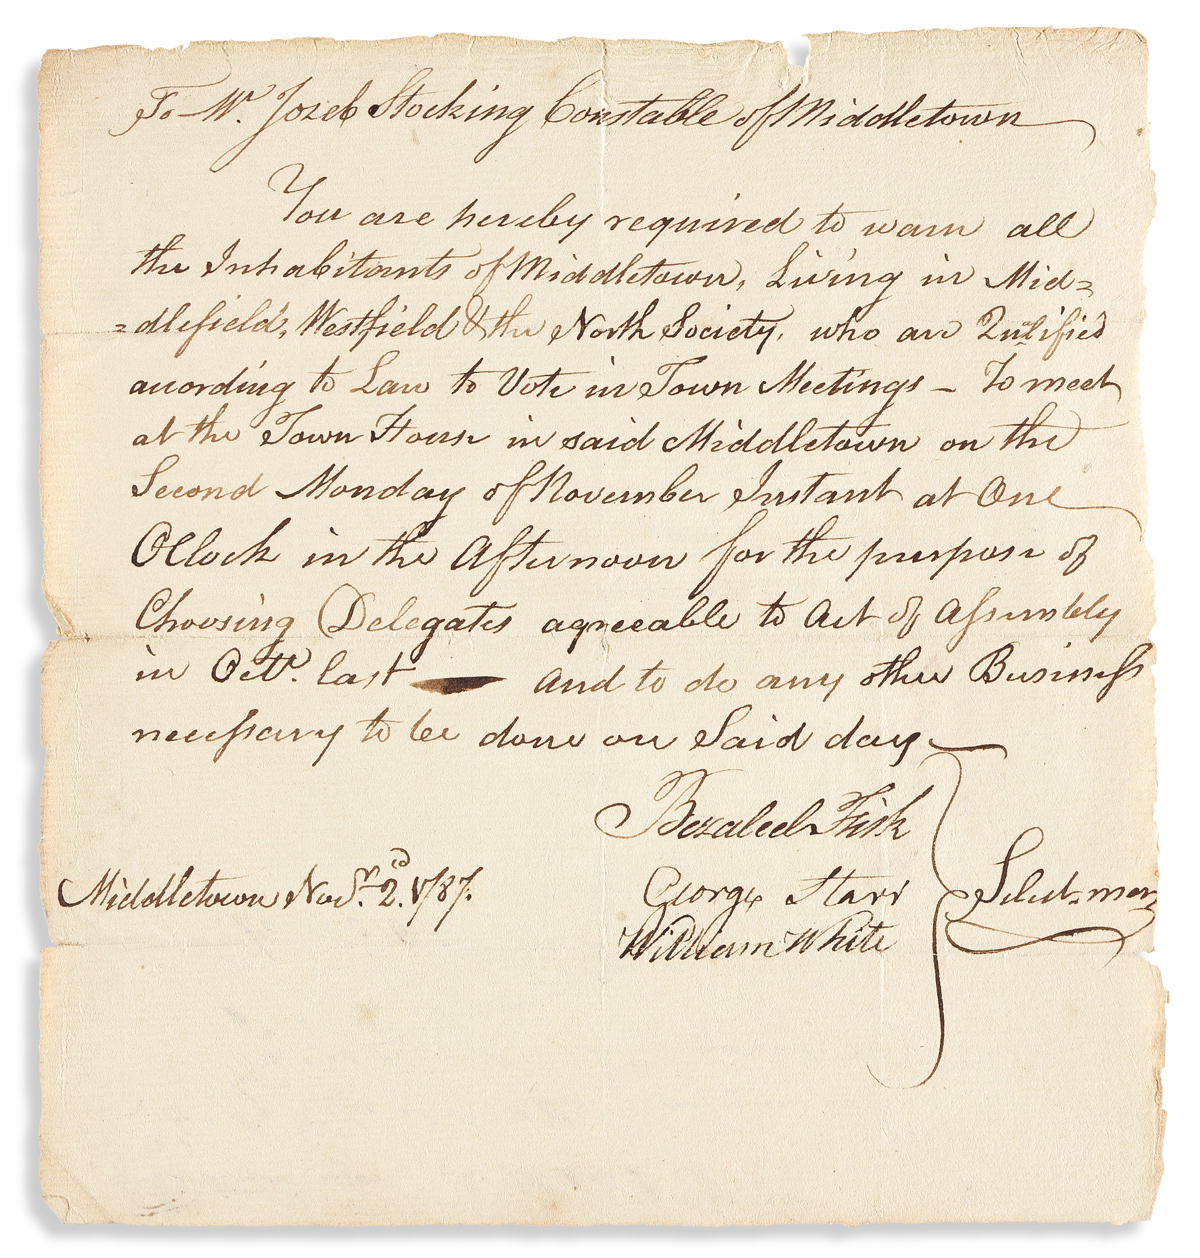 (CONSTITUTION.) Order for voting on delegates to Connecticuts convention for ratifying the Constitution.